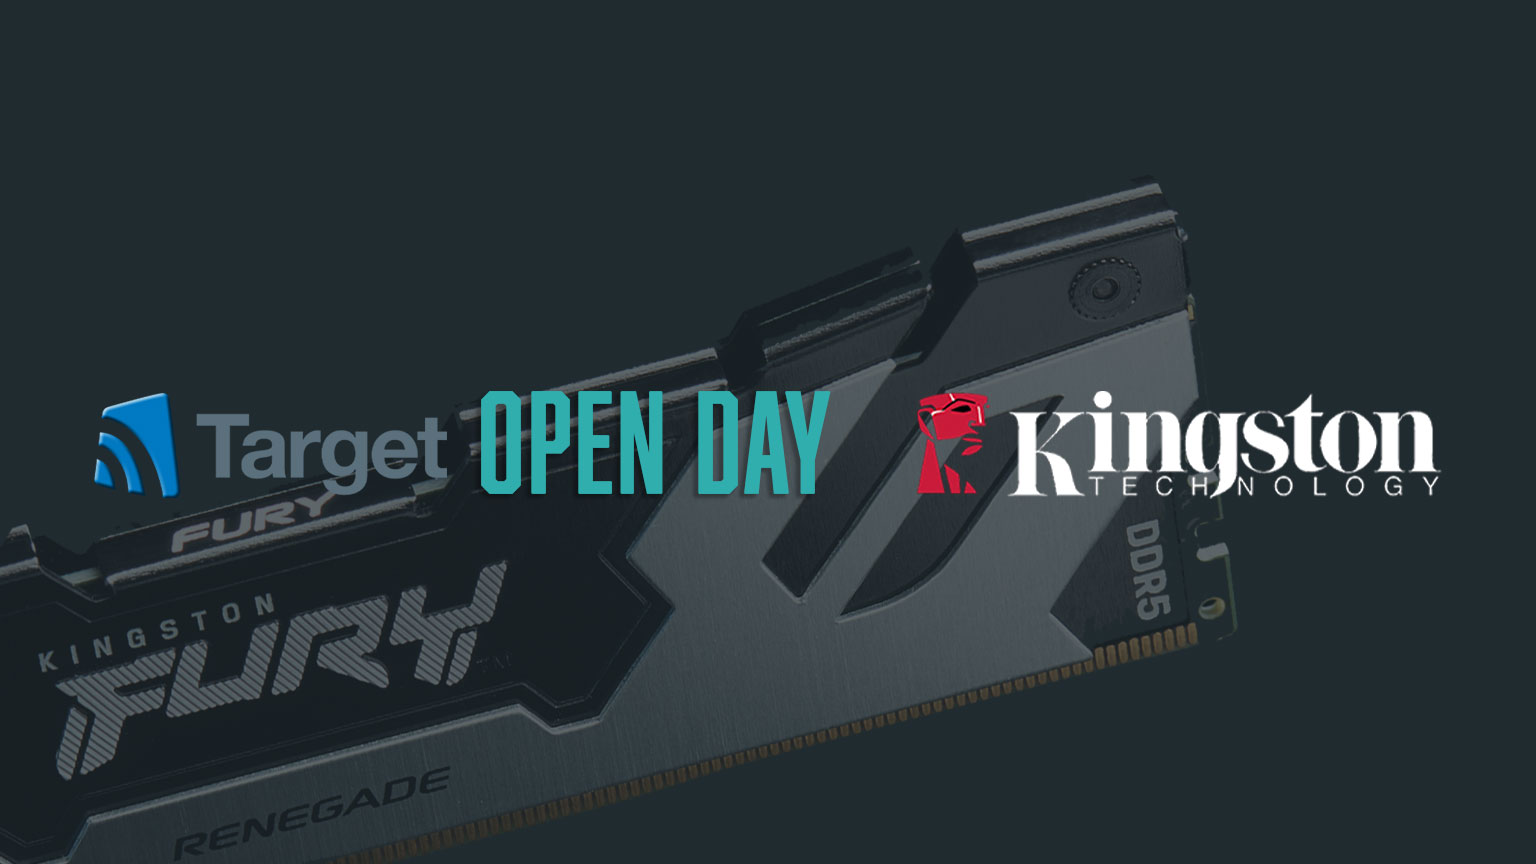 Kingston Technology at the Target Open Day 2023